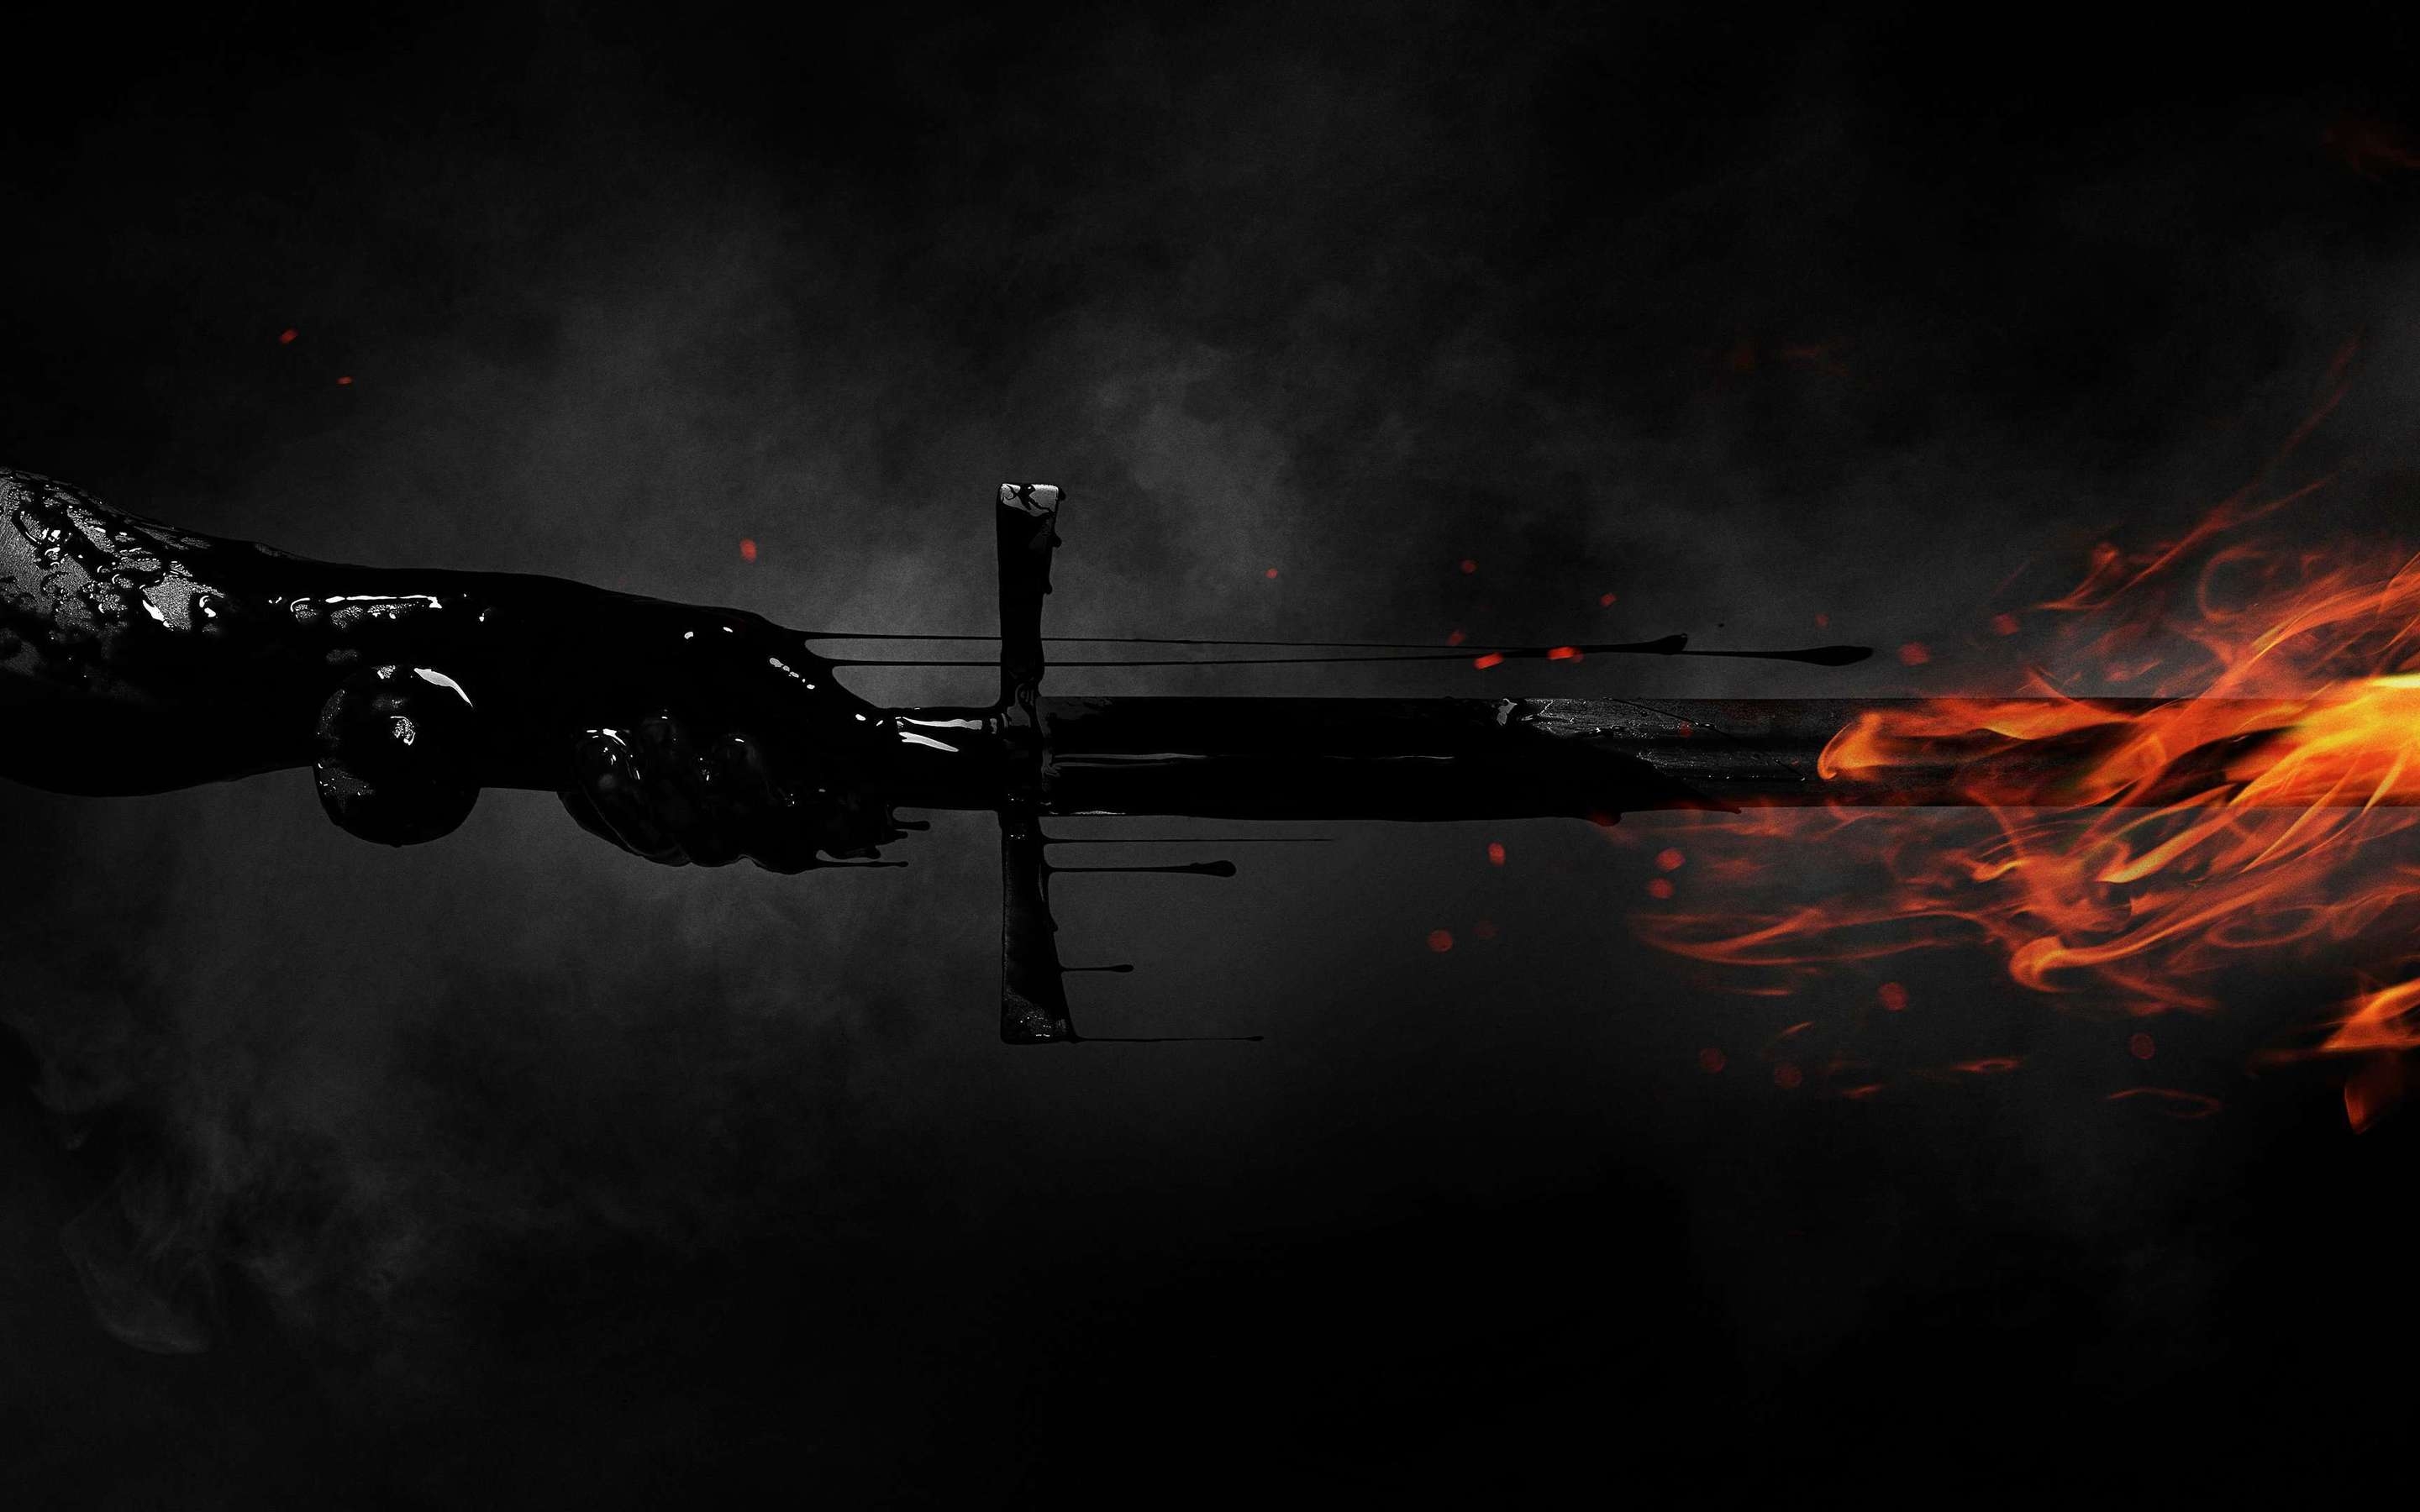 The Last Witch Hunter Sword for 2880 x 1800 Retina Display resolution